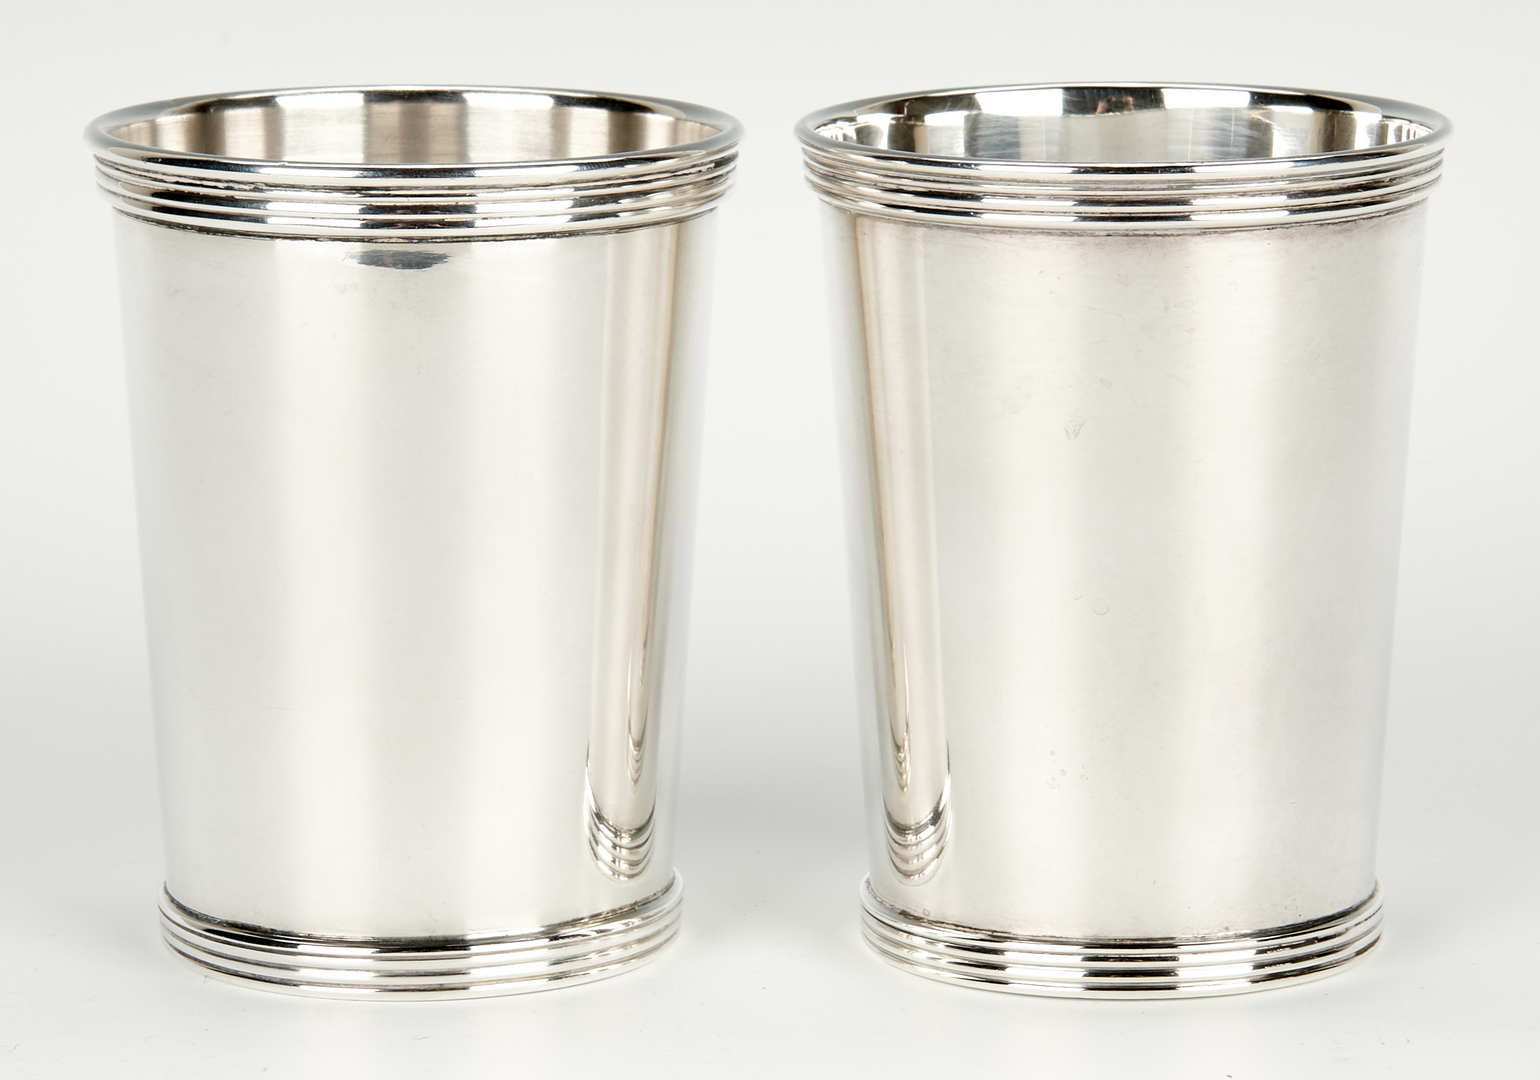 Lot 438: 11 Sterling Silver Julep Cups, incl. International, Manchester